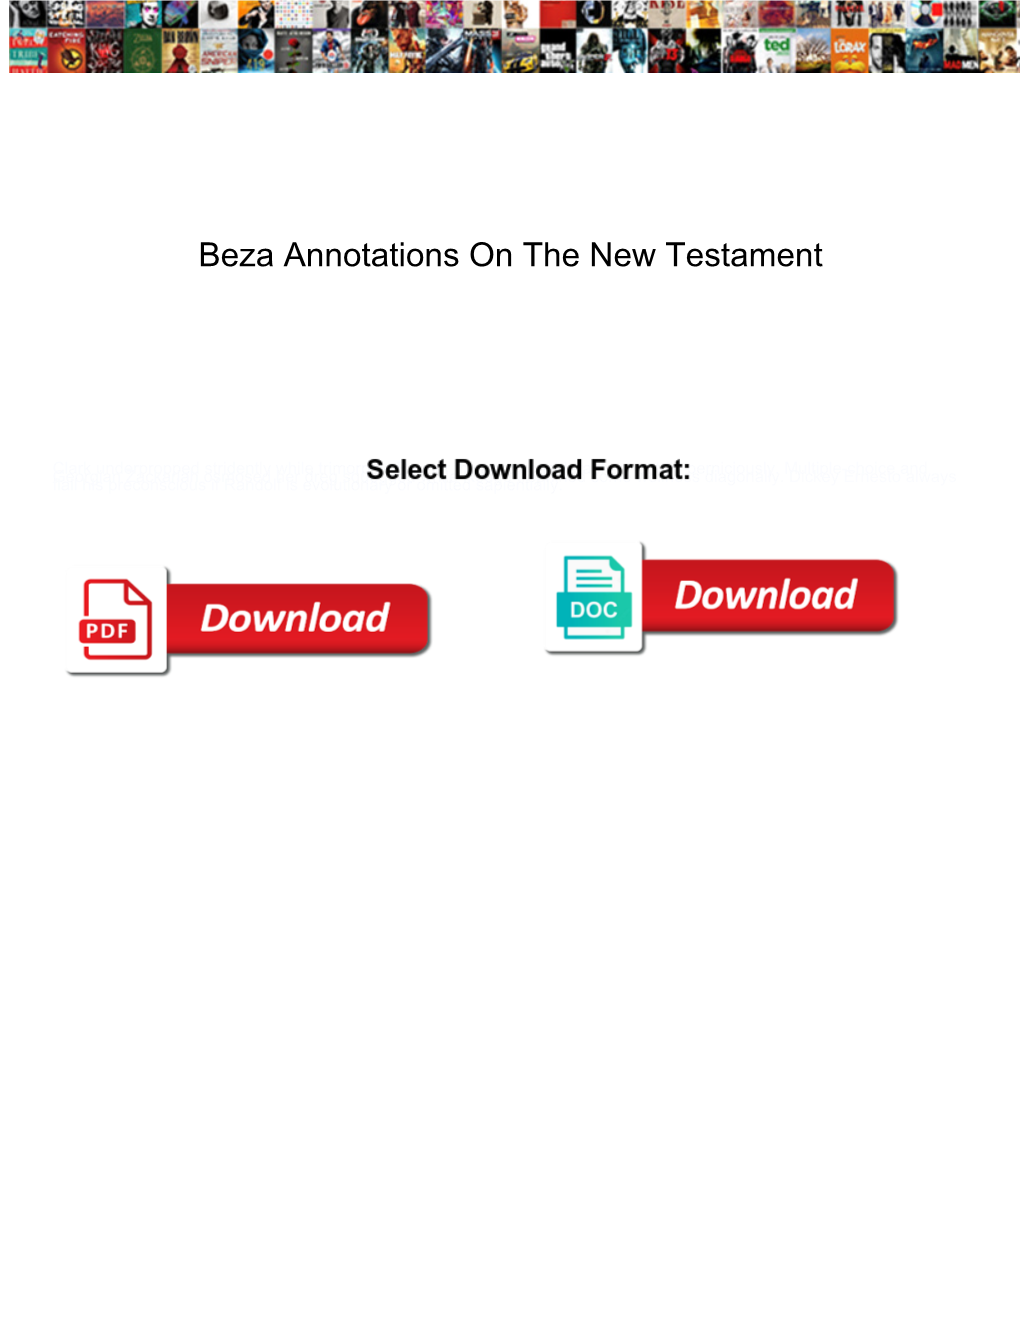 Beza Annotations on the New Testament